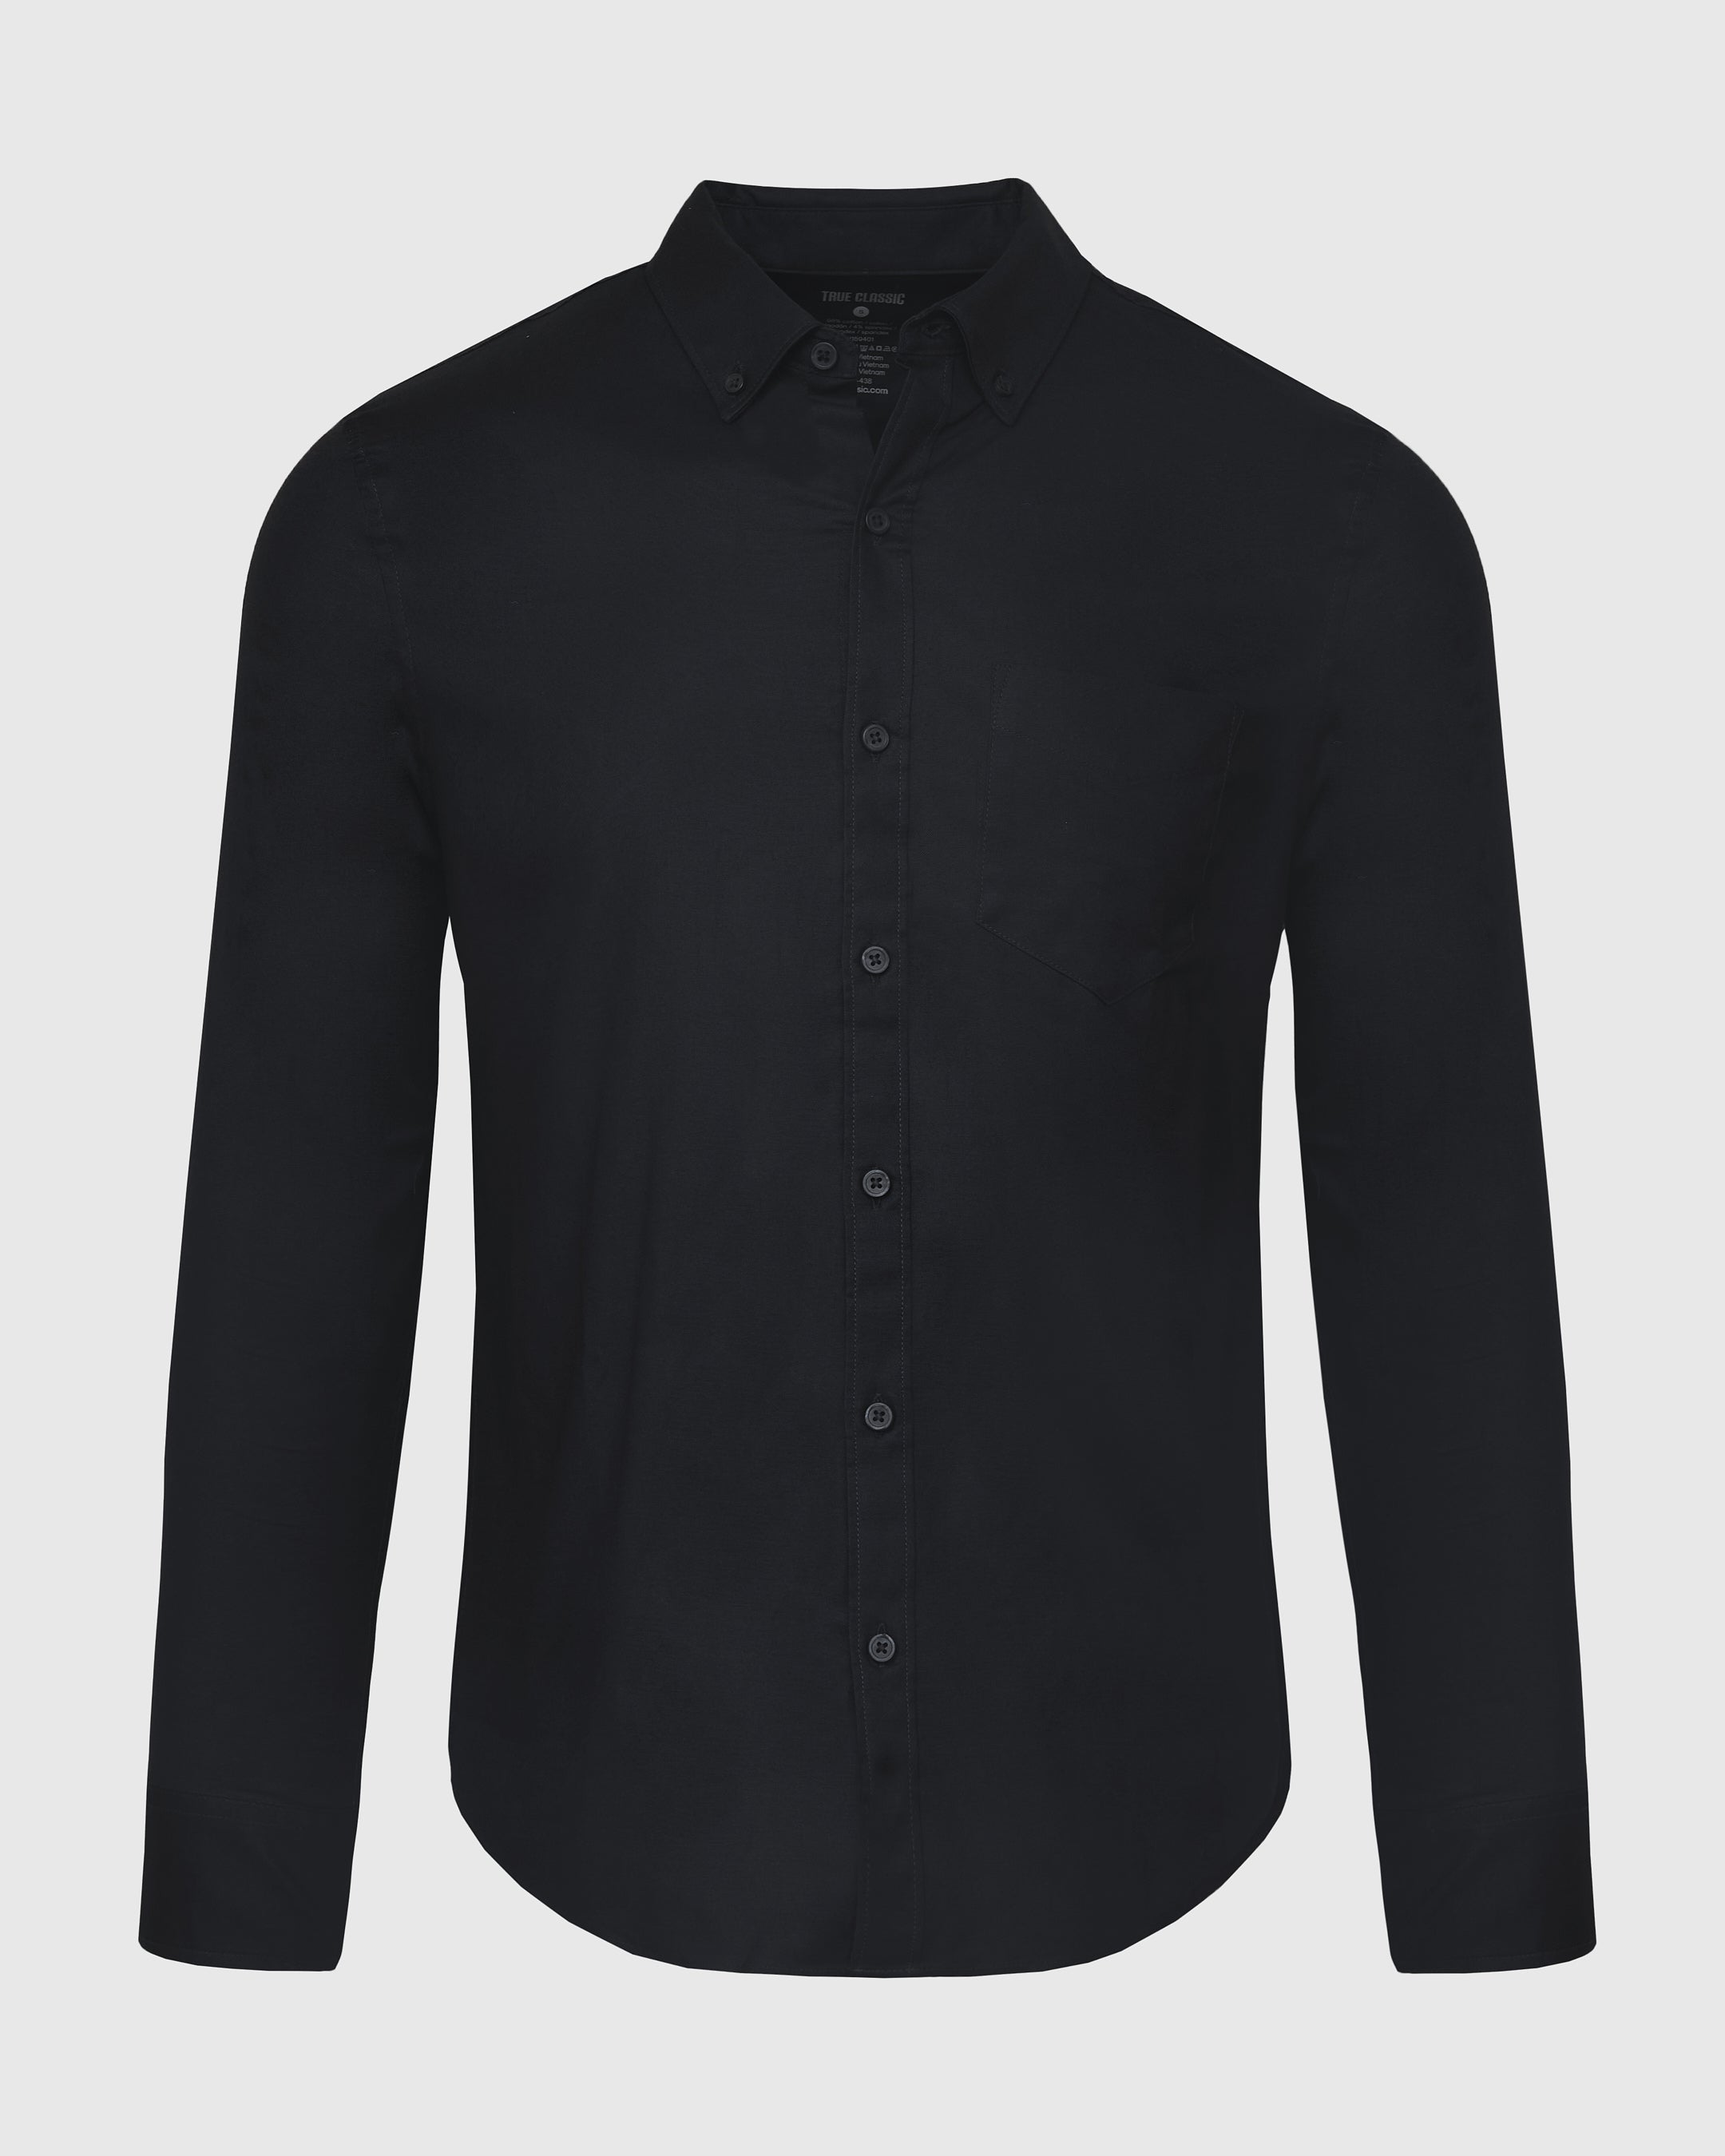 Black Stretch Oxford Long Sleeve Button Up Shirt | Black Stretch Oxford ...